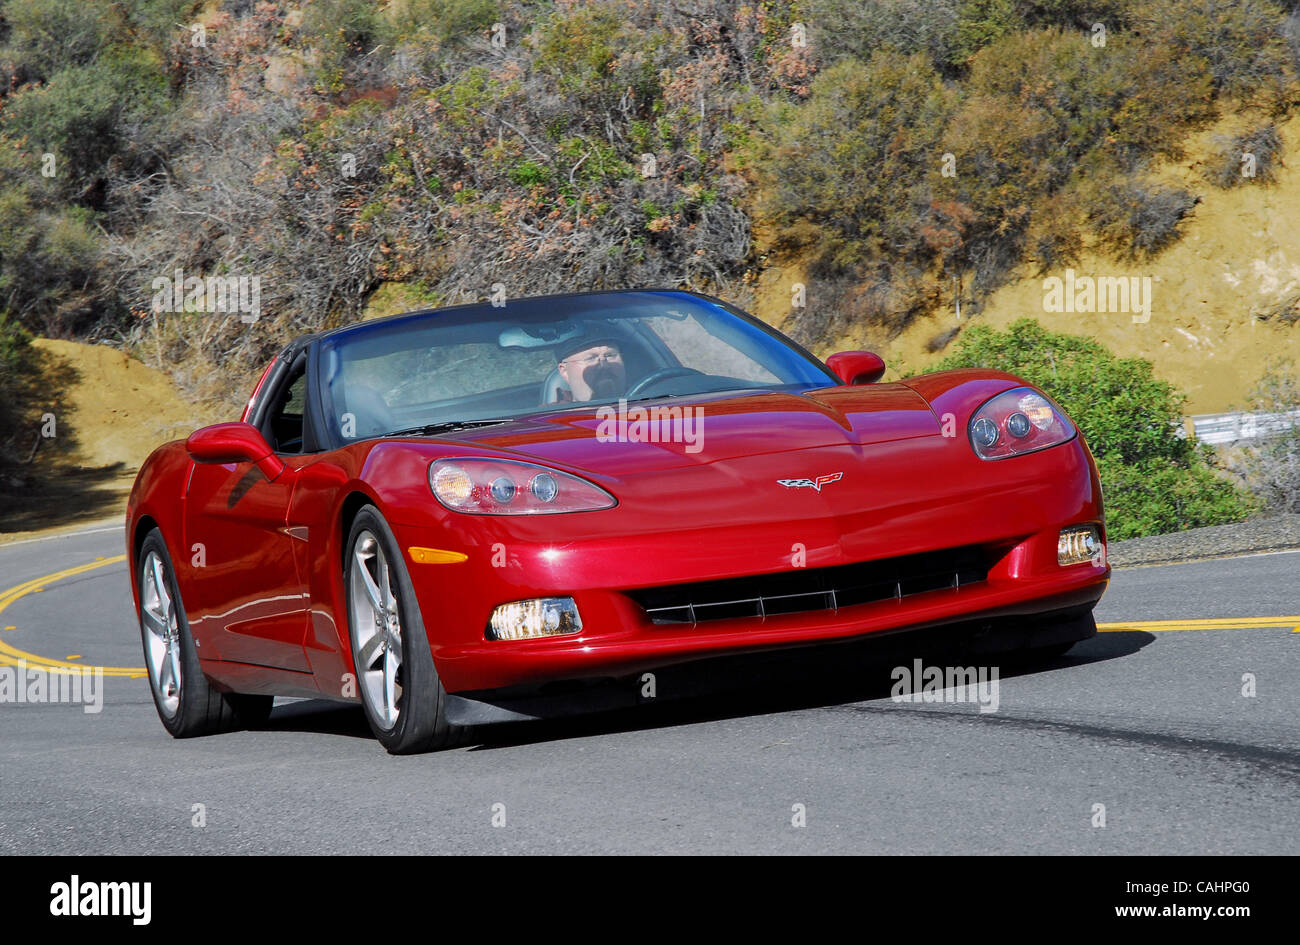 Dec 12, 2007 - Los Angeles, California, USA - There are many upgrades and refinements in this latest C6 Corvette, making it a true super car with a quicker 0-60mph time of just 4.1sec., and a top speed of 190mph. These facts are due to the new LS3 6.2 liter, V8 engine that now pumps out 430hp at 5,9 Stock Photo